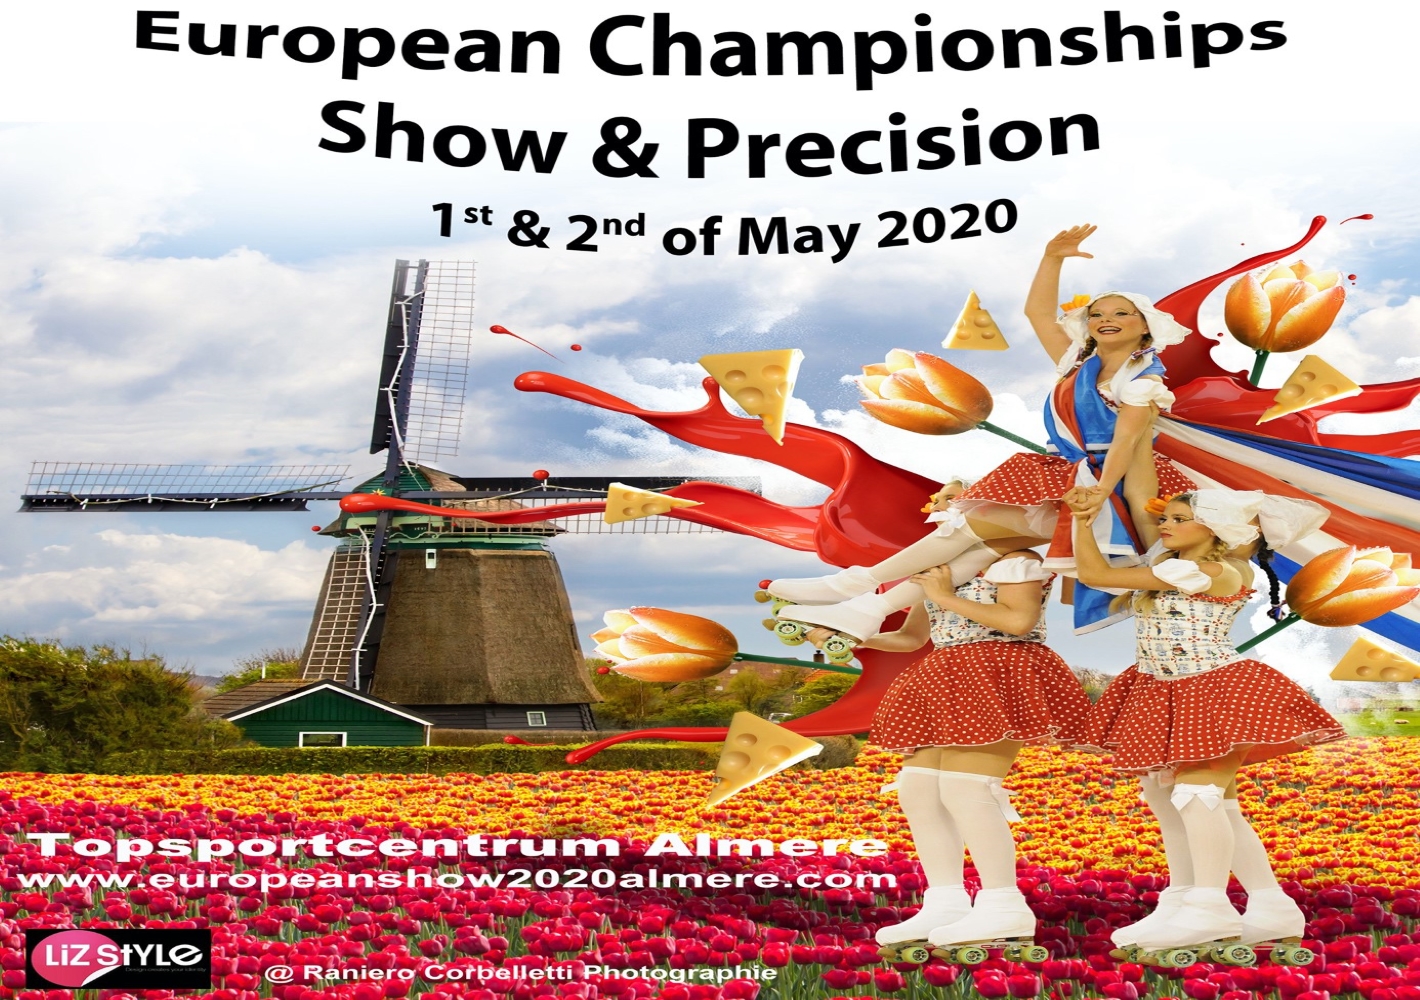 images/European_Championships_Show_and_Precision_2020.jpg